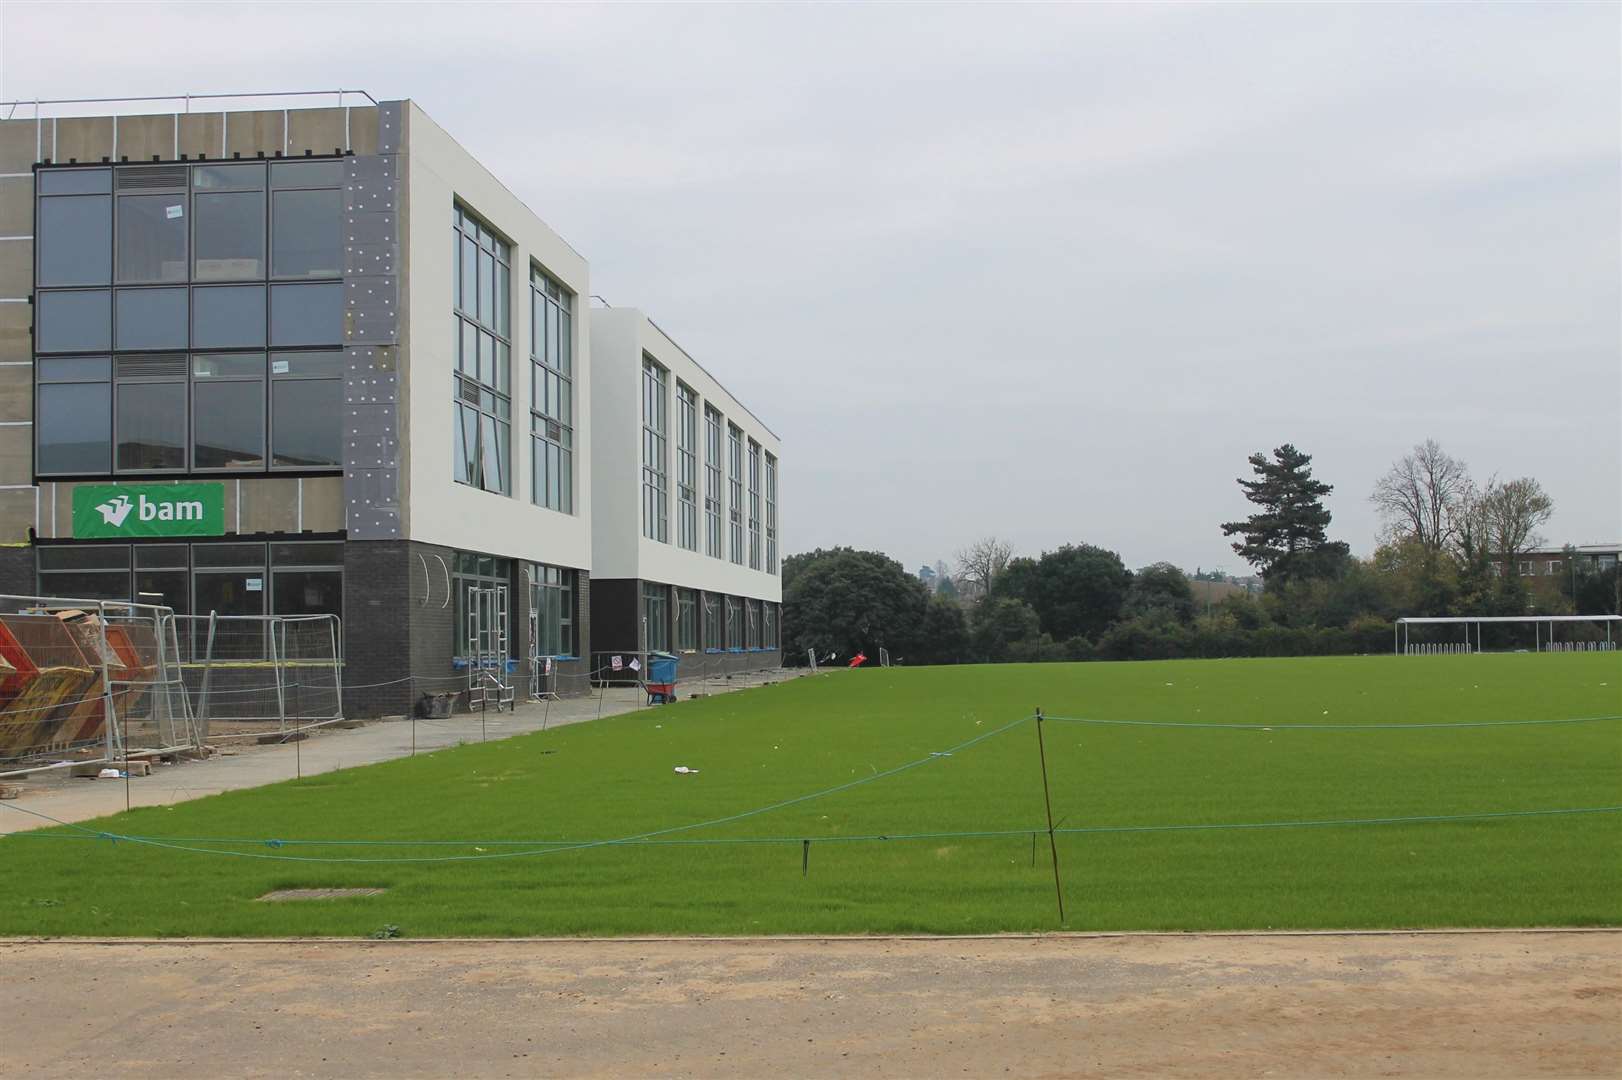 Stone Lodge School will open its new £32m school building to pupils next year. Photo: Endeavour MAT Trust